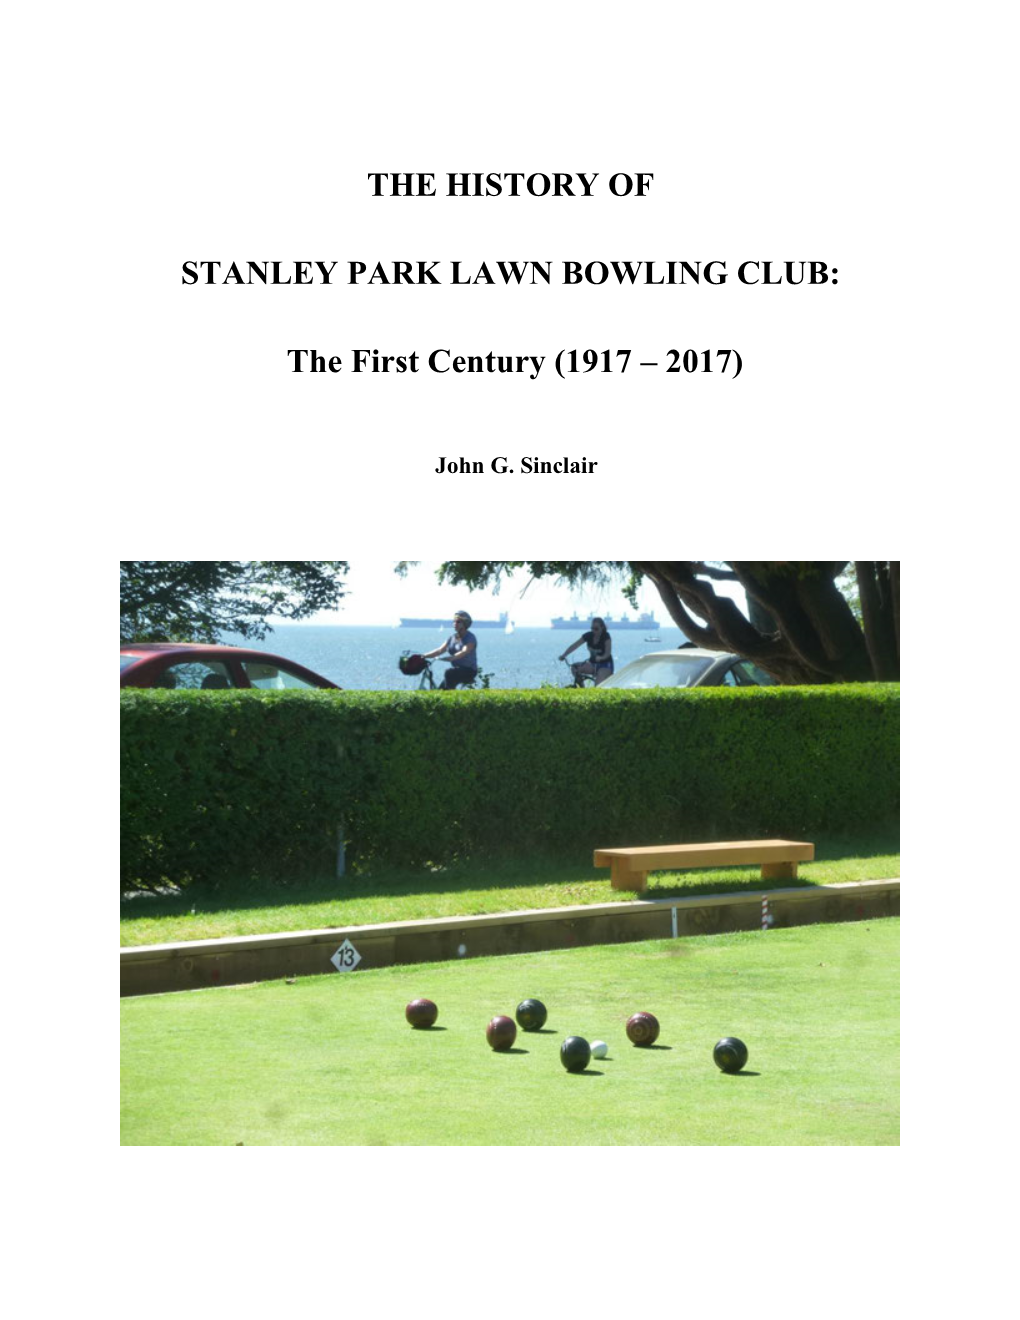 The History of Stanley Park Lawn Bowling Club: the First Ninety Years (1917 – 2007) – John G